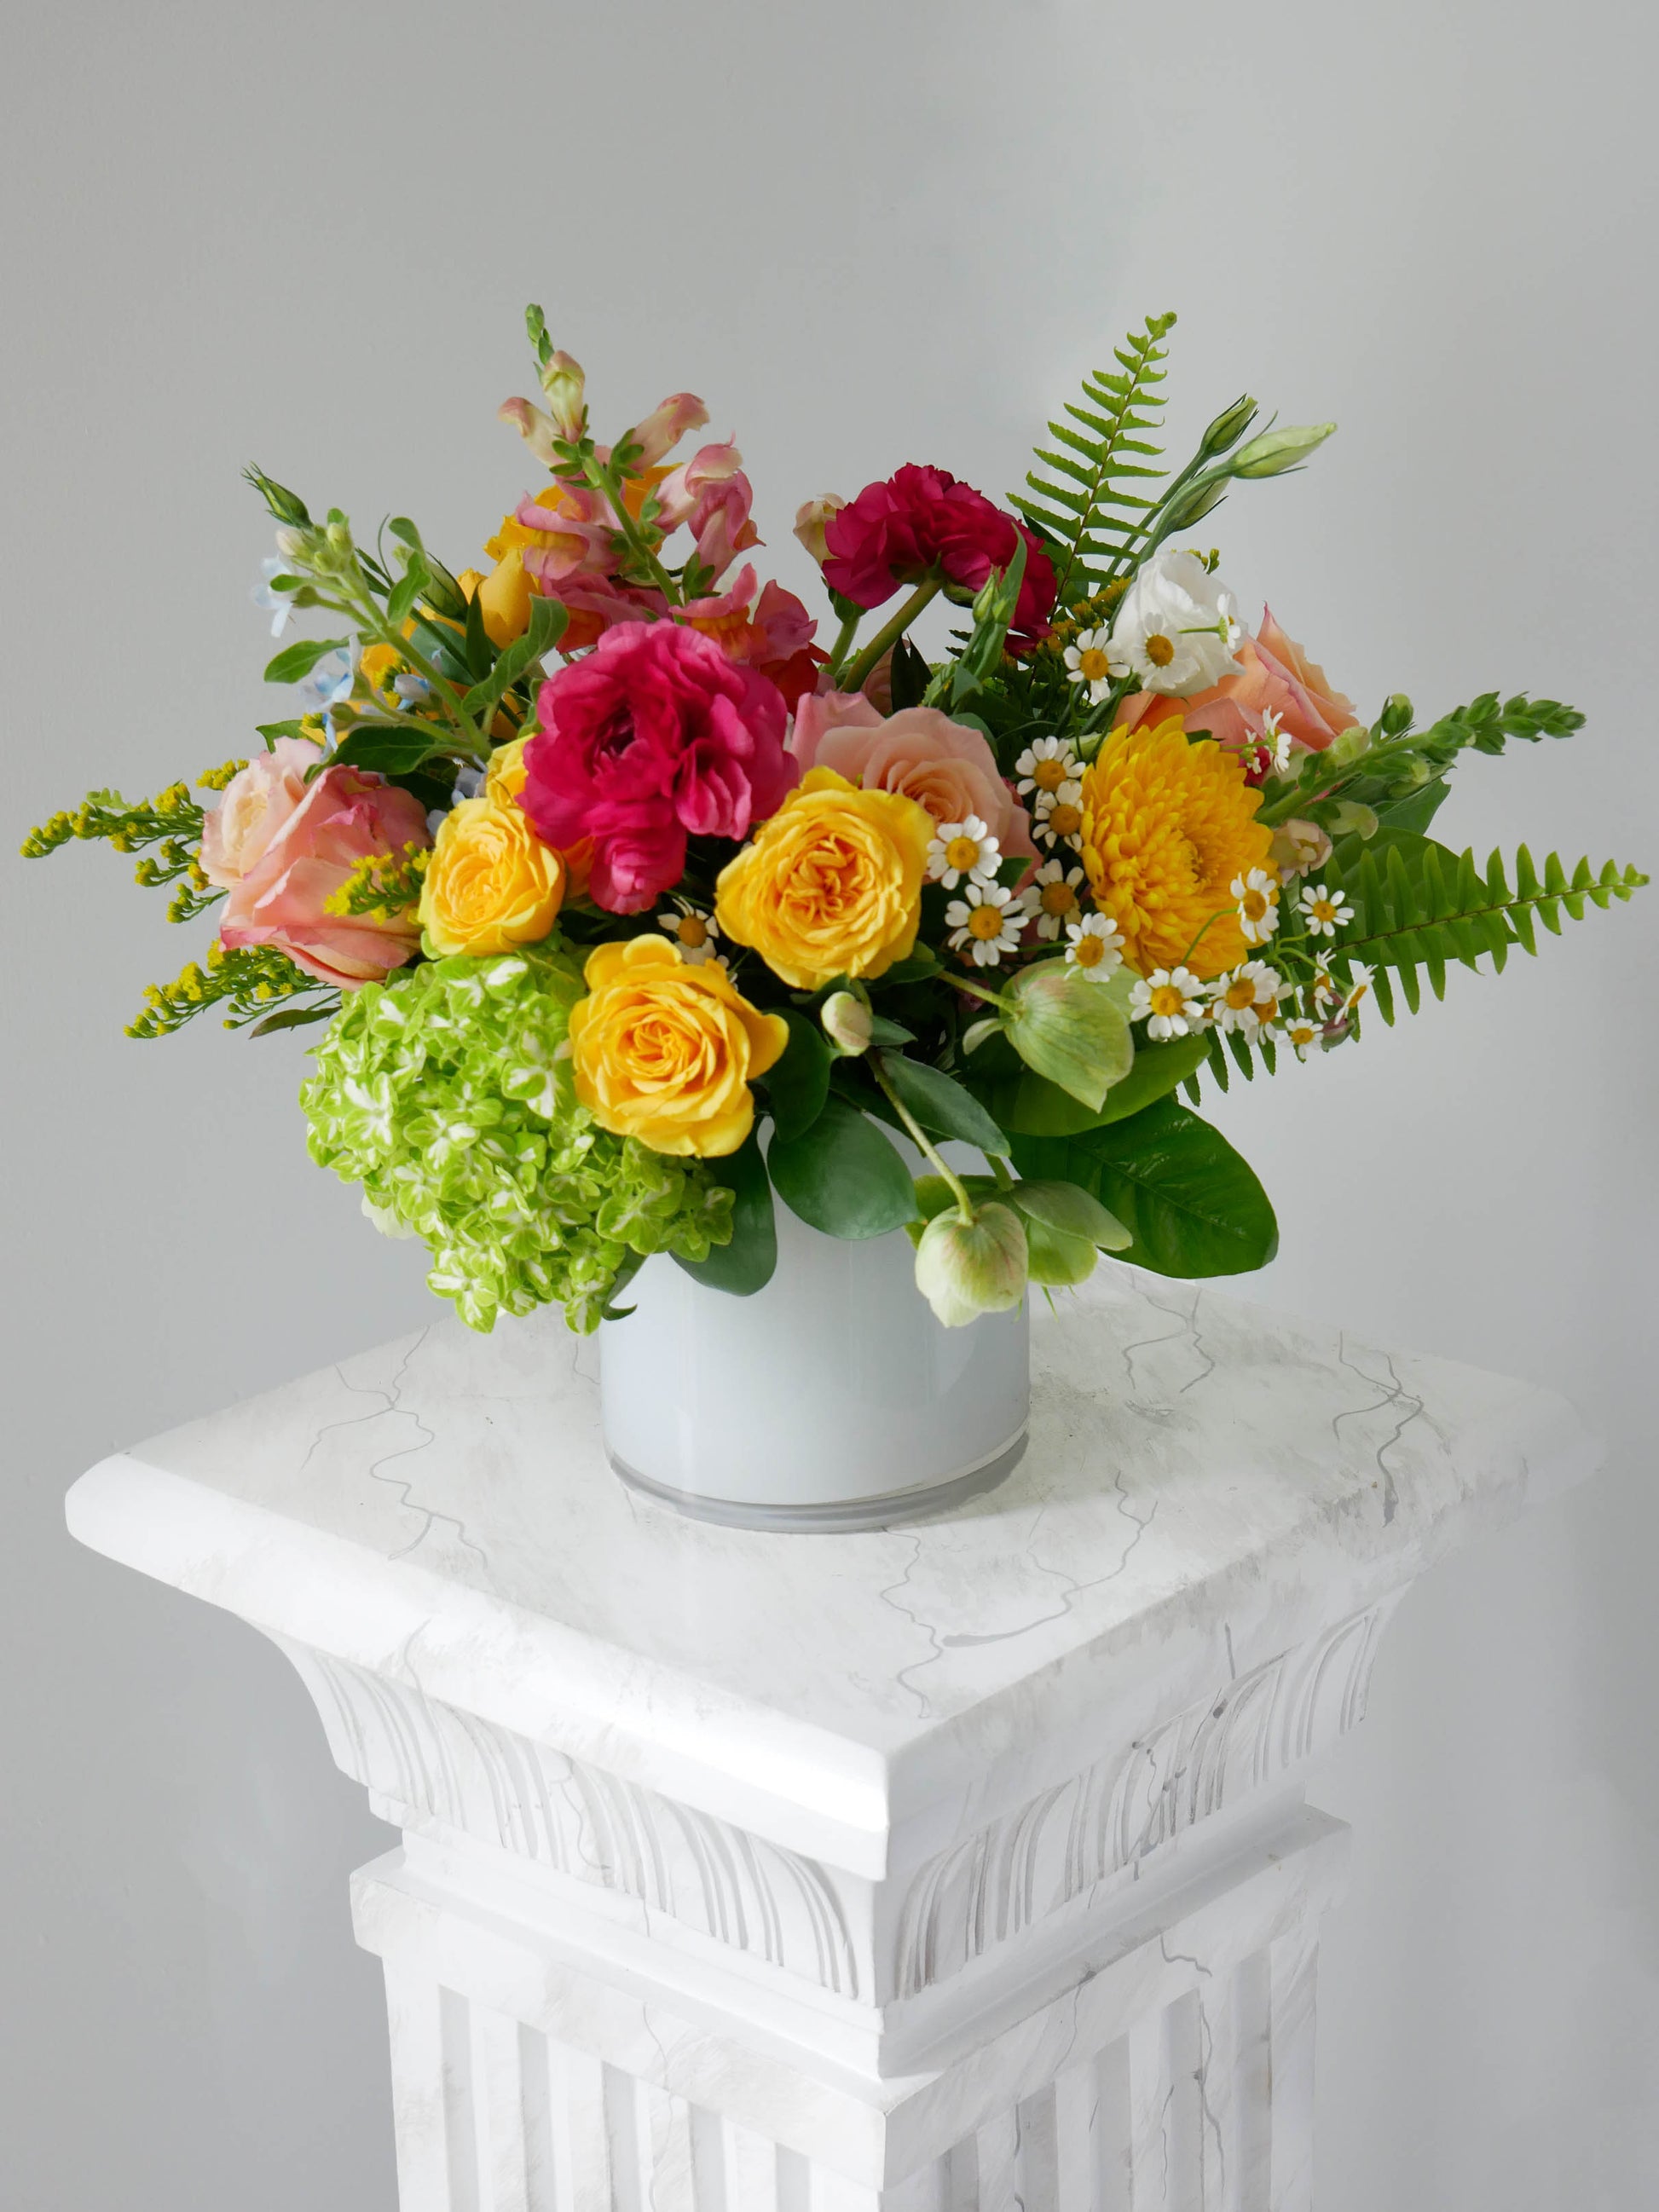 Premium size flower arrangement in low white cylinder featuring hot pink ranunculus, yellow roses, peachy roses and greens